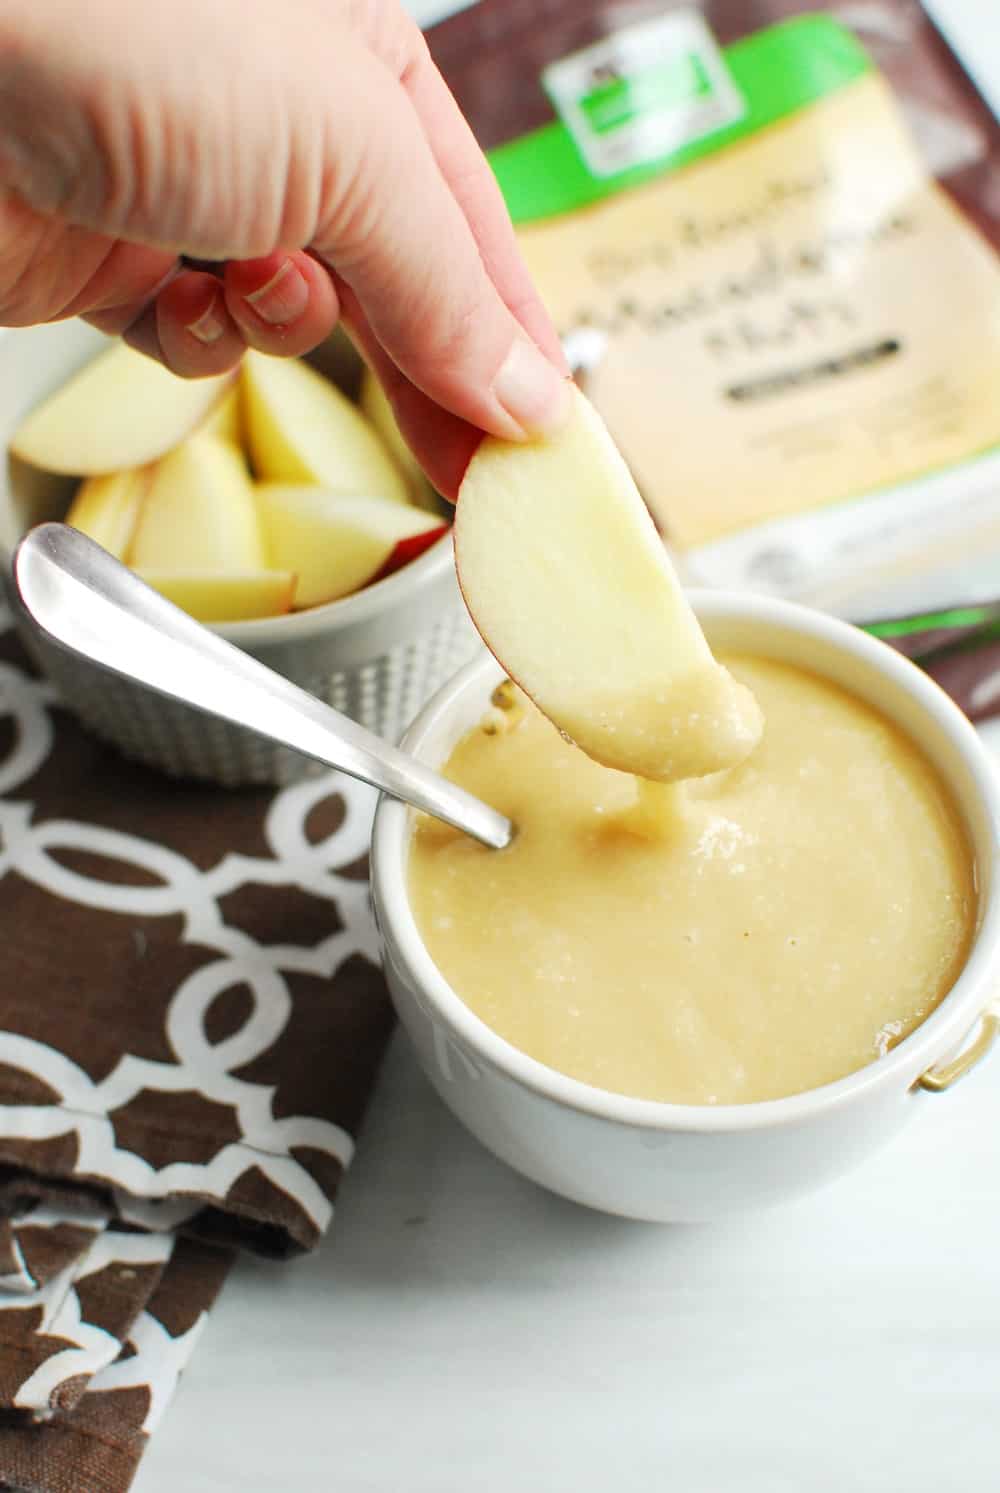 Apples with homemade macadamia nut butter